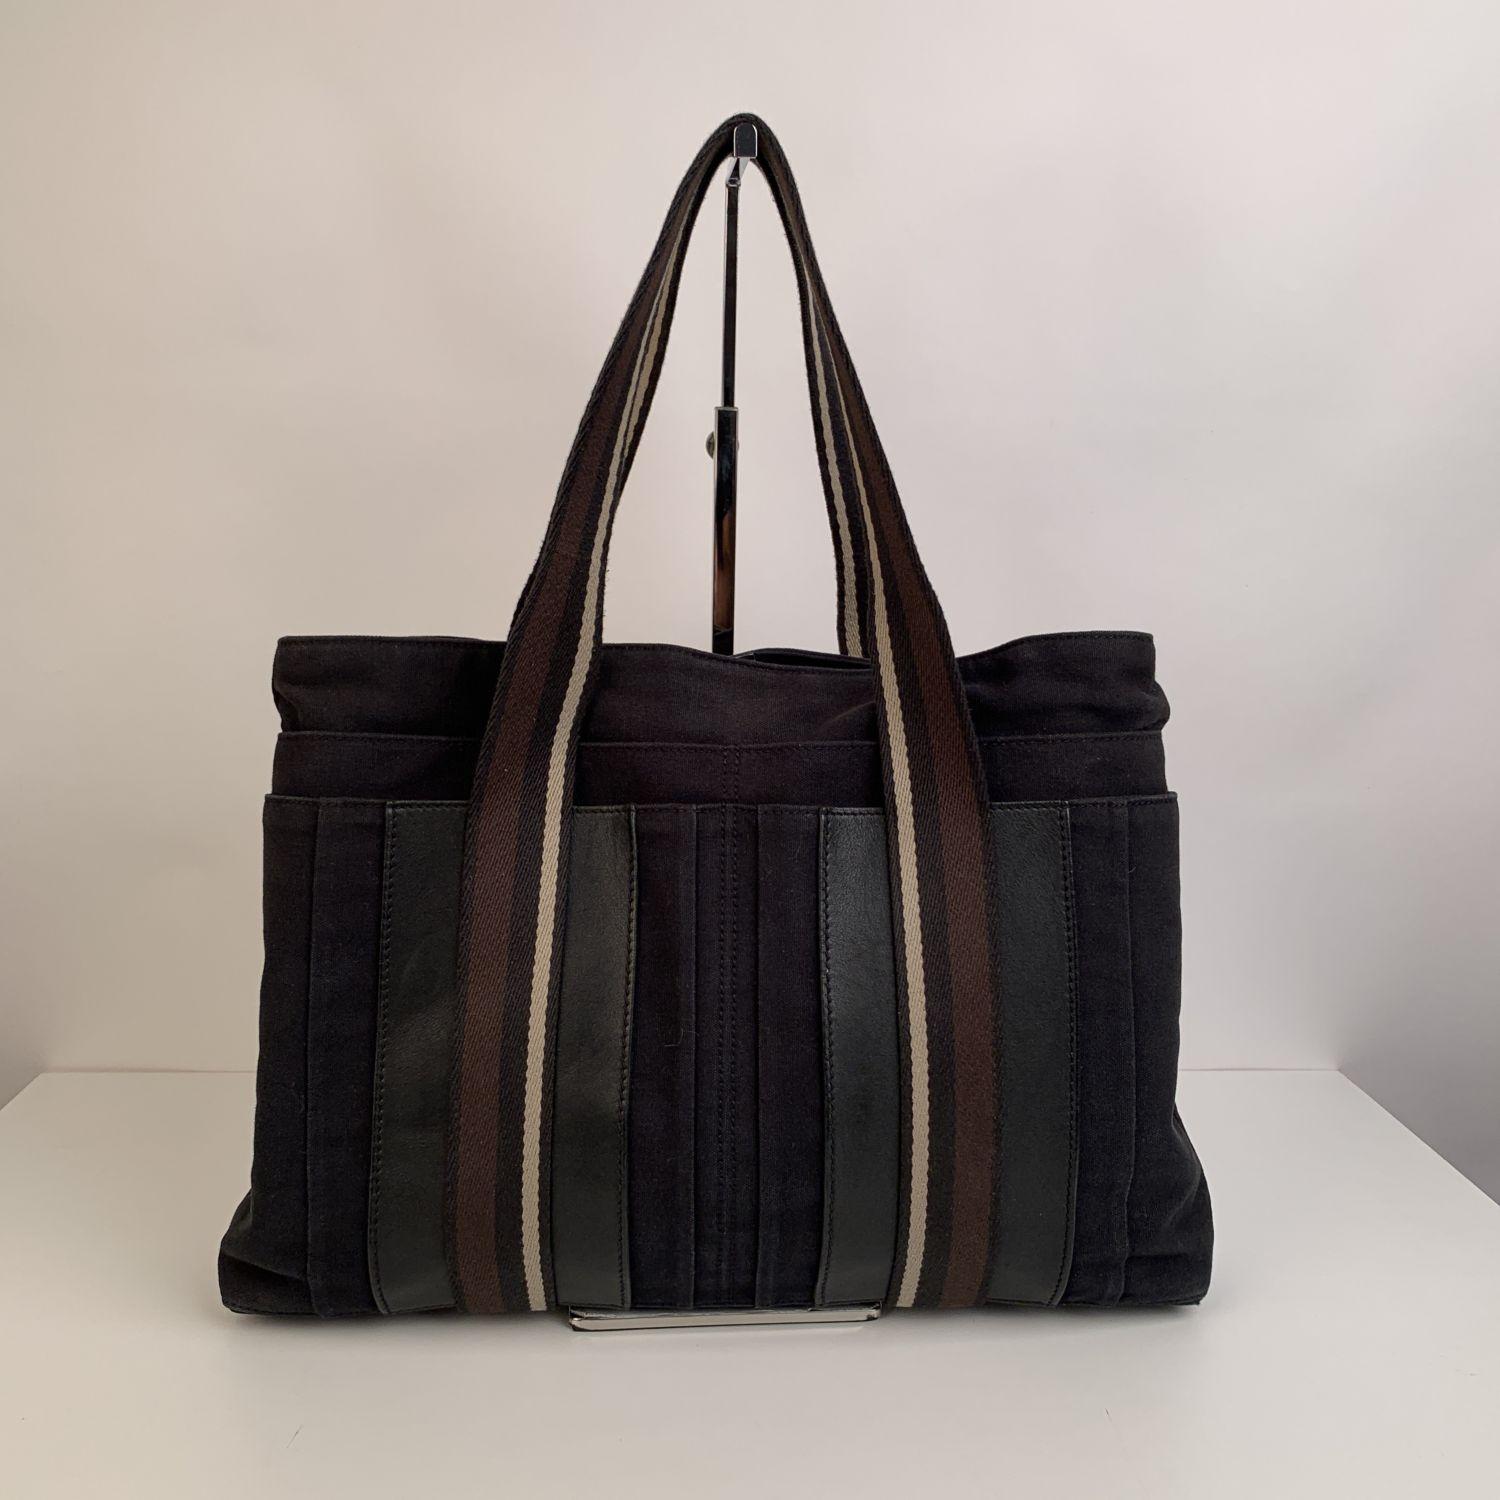 Hermès Horizontal Troca MM bag crafted in a black cotton canvas with genuine leather trim. Brown and white stripes detailing. It features double top handles, 4 front slip pockets and upper button closure. Canvas lining and and 1 zip pocket inside.